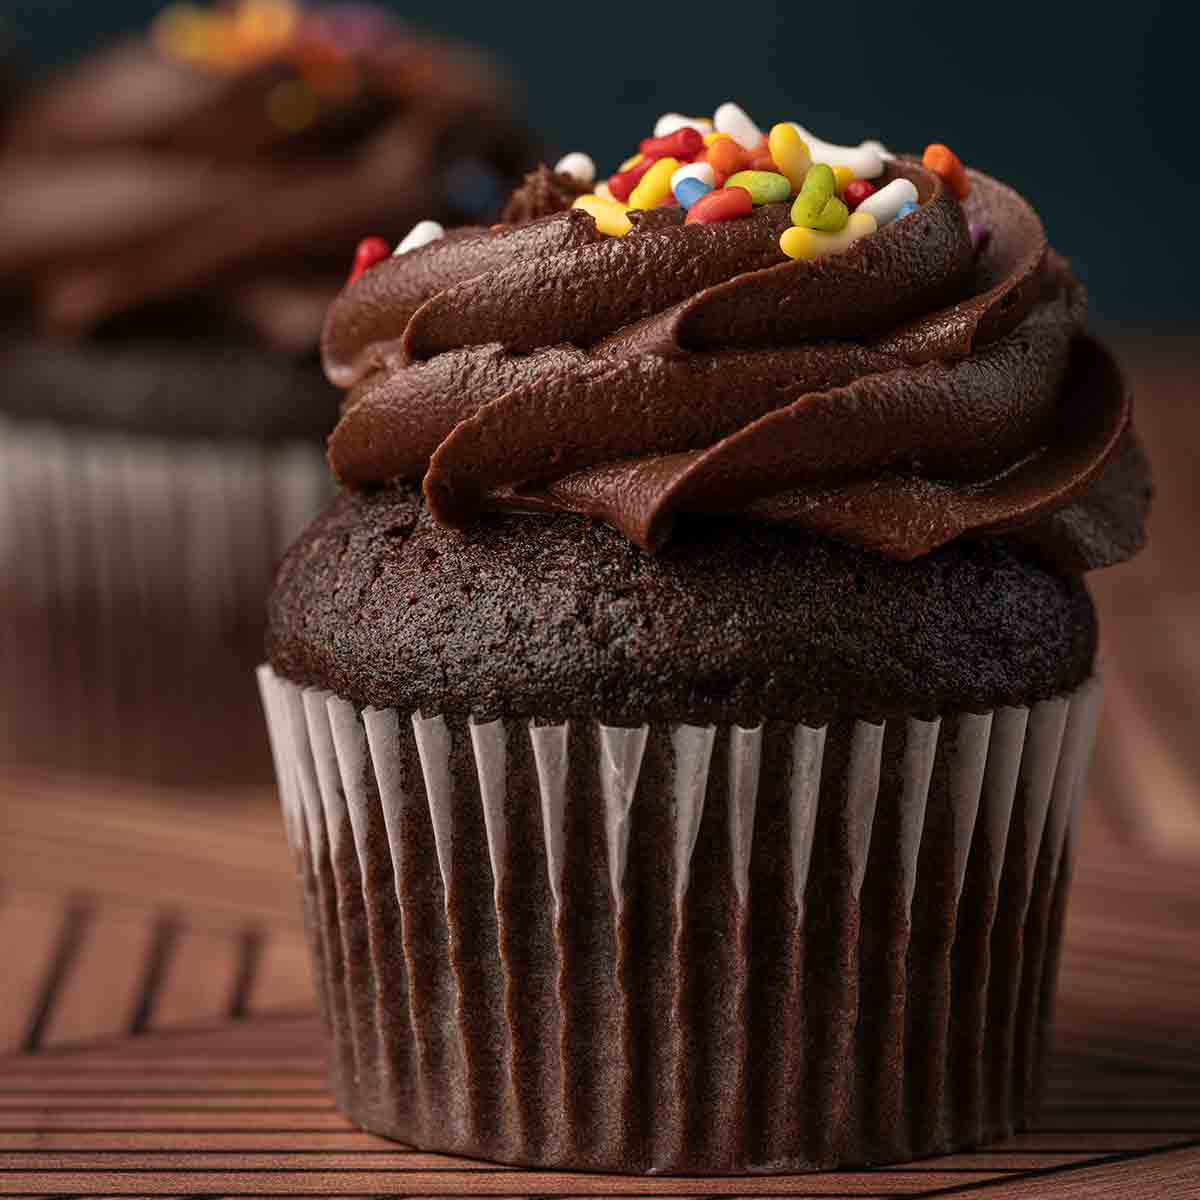 Chocolate Cupcake With Sprinkles On Top